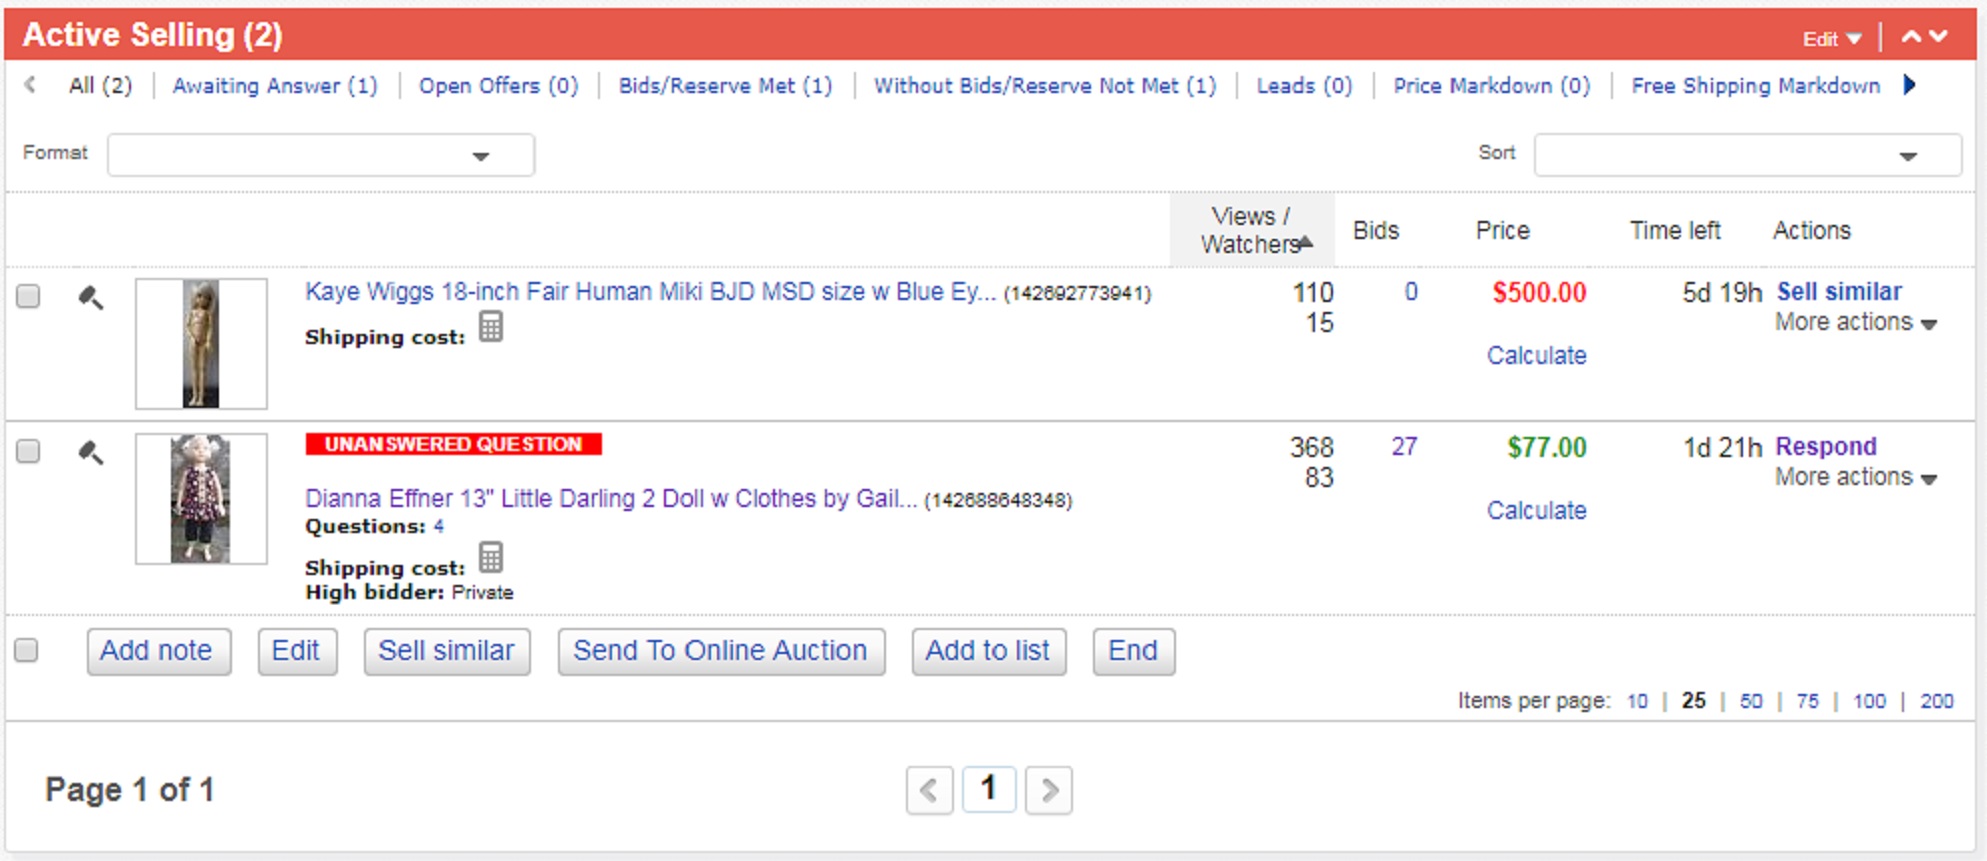 Screencap I took of my ebay auctions this evening